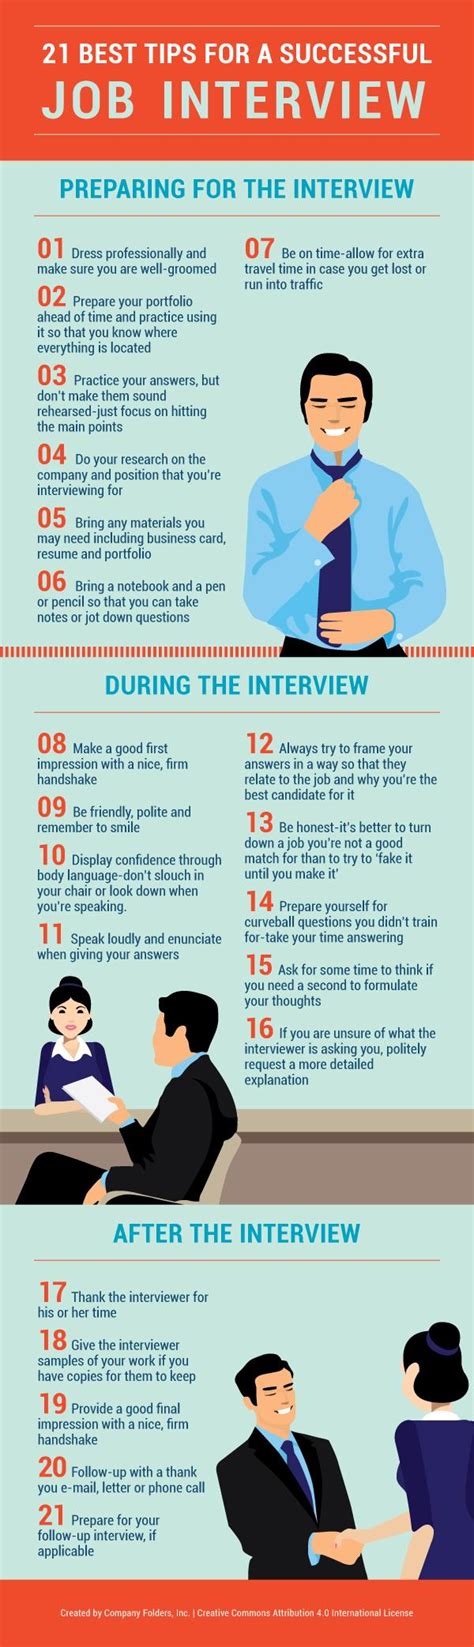 21 Job Interview Tips And Tricks Infographic